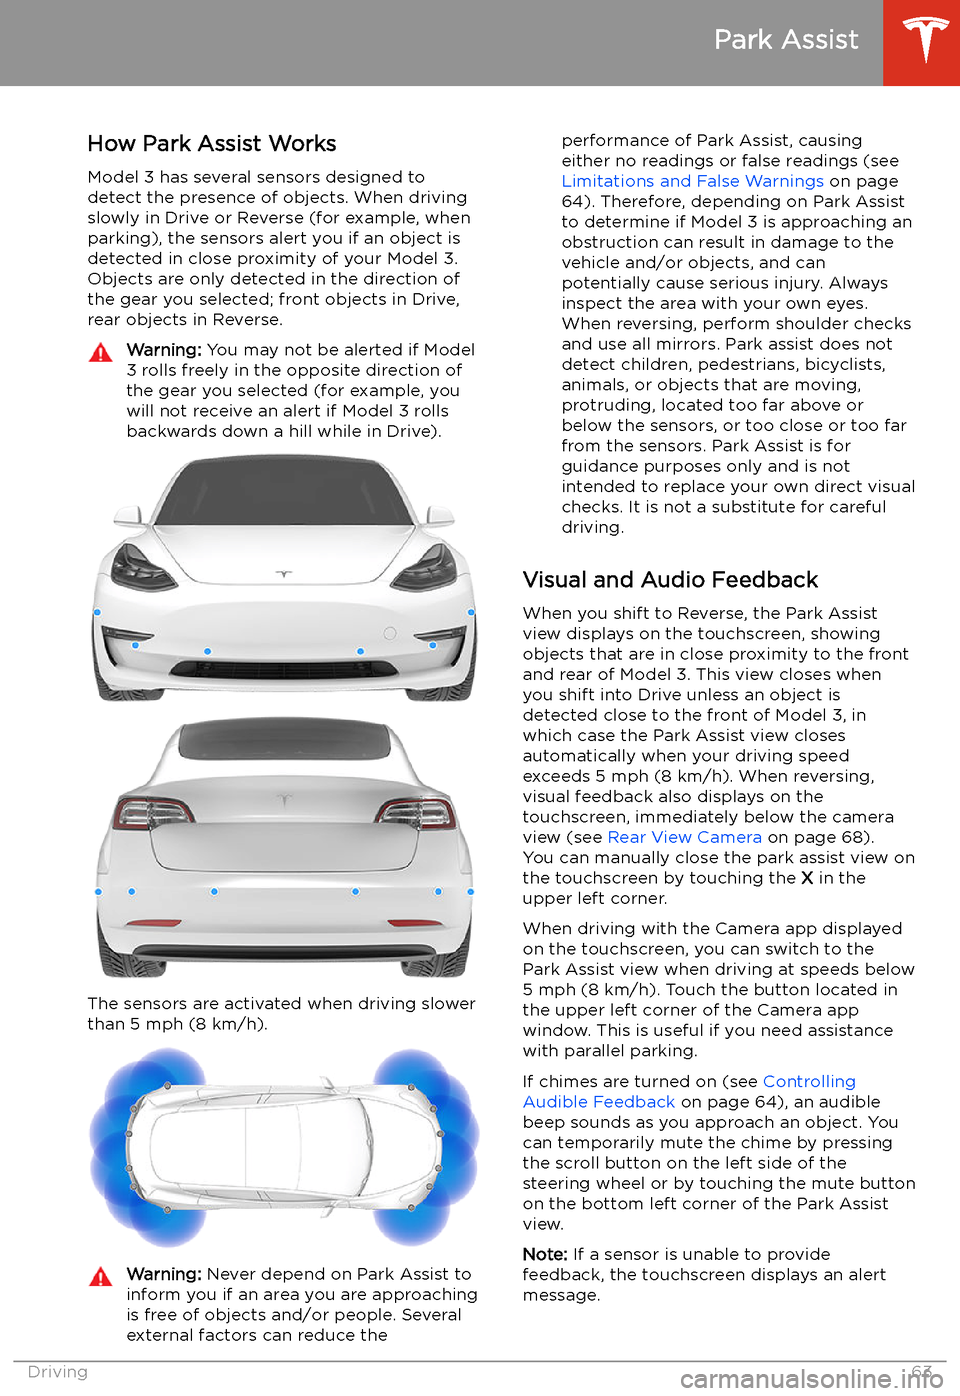 TESLA MODEL 3 2019  Owners Manual (Europe) Park Assist
How Park Assist Works
Model 3 has several sensors designed to
detect the presence of objects. When driving
slowly in Drive or Reverse (for example, when
parking), the sensors alert you if 